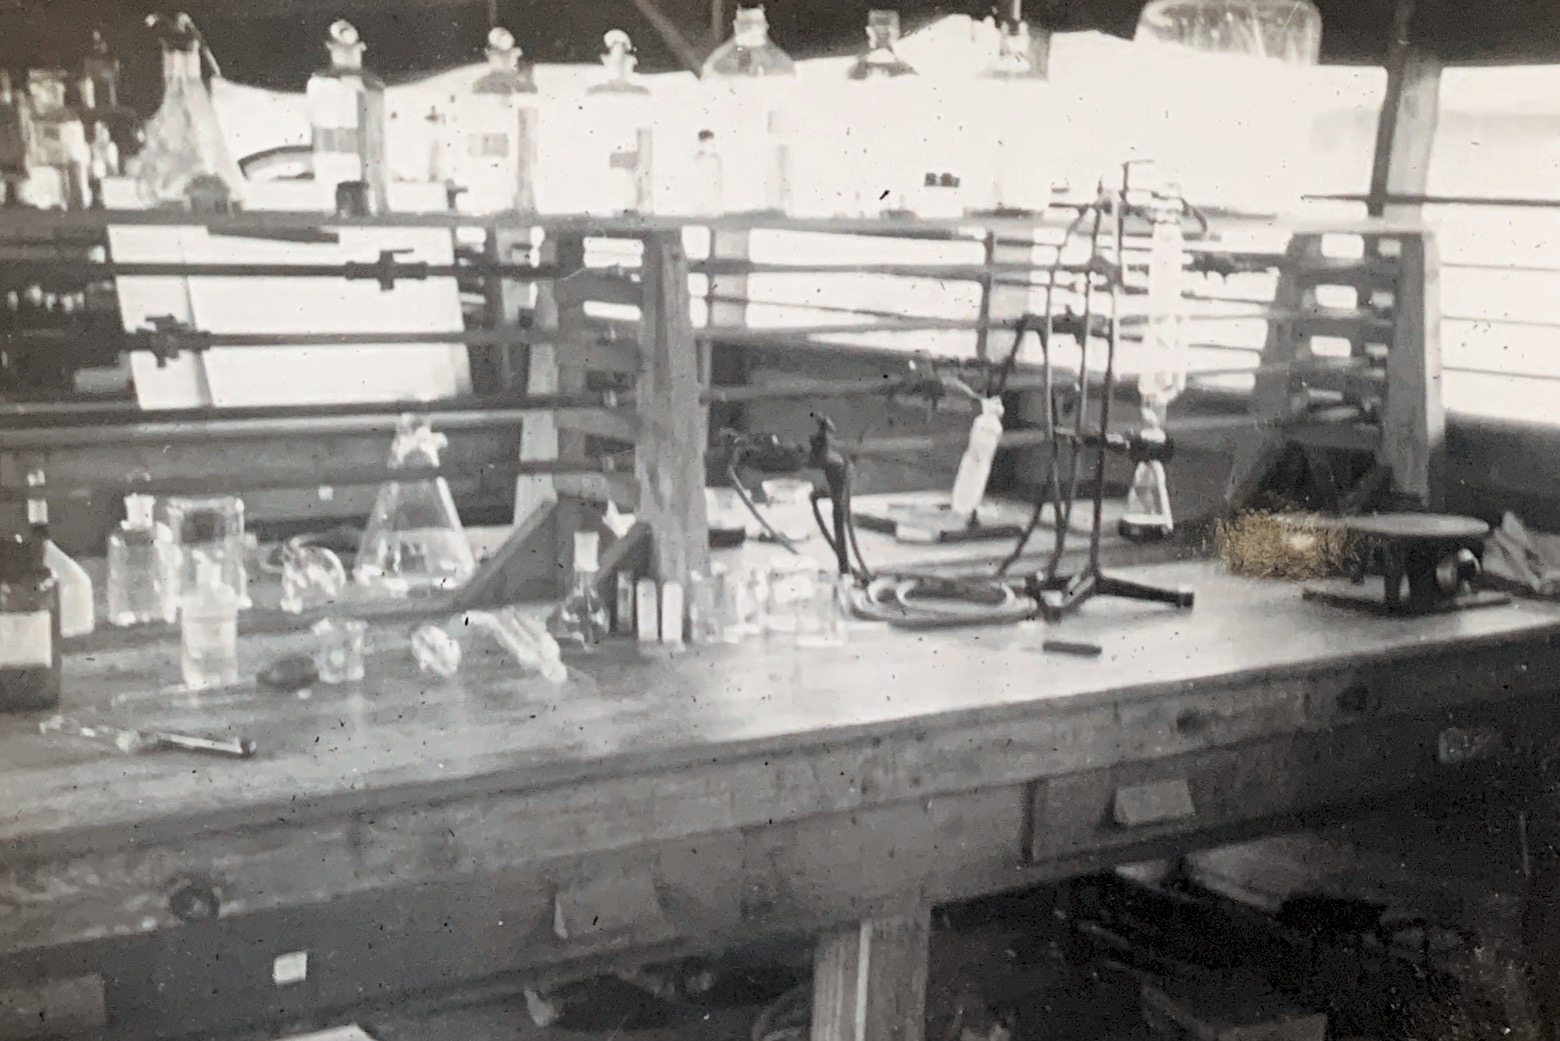 Chemical warfare lab on San José Island in Panama. Sometime after Lt. Larrabee’s arrival, there was no more research but he did have an accidental exposure to the mustard gas. The war had ended in Europe. He spent the war here from the winter of 1945 to 1946.